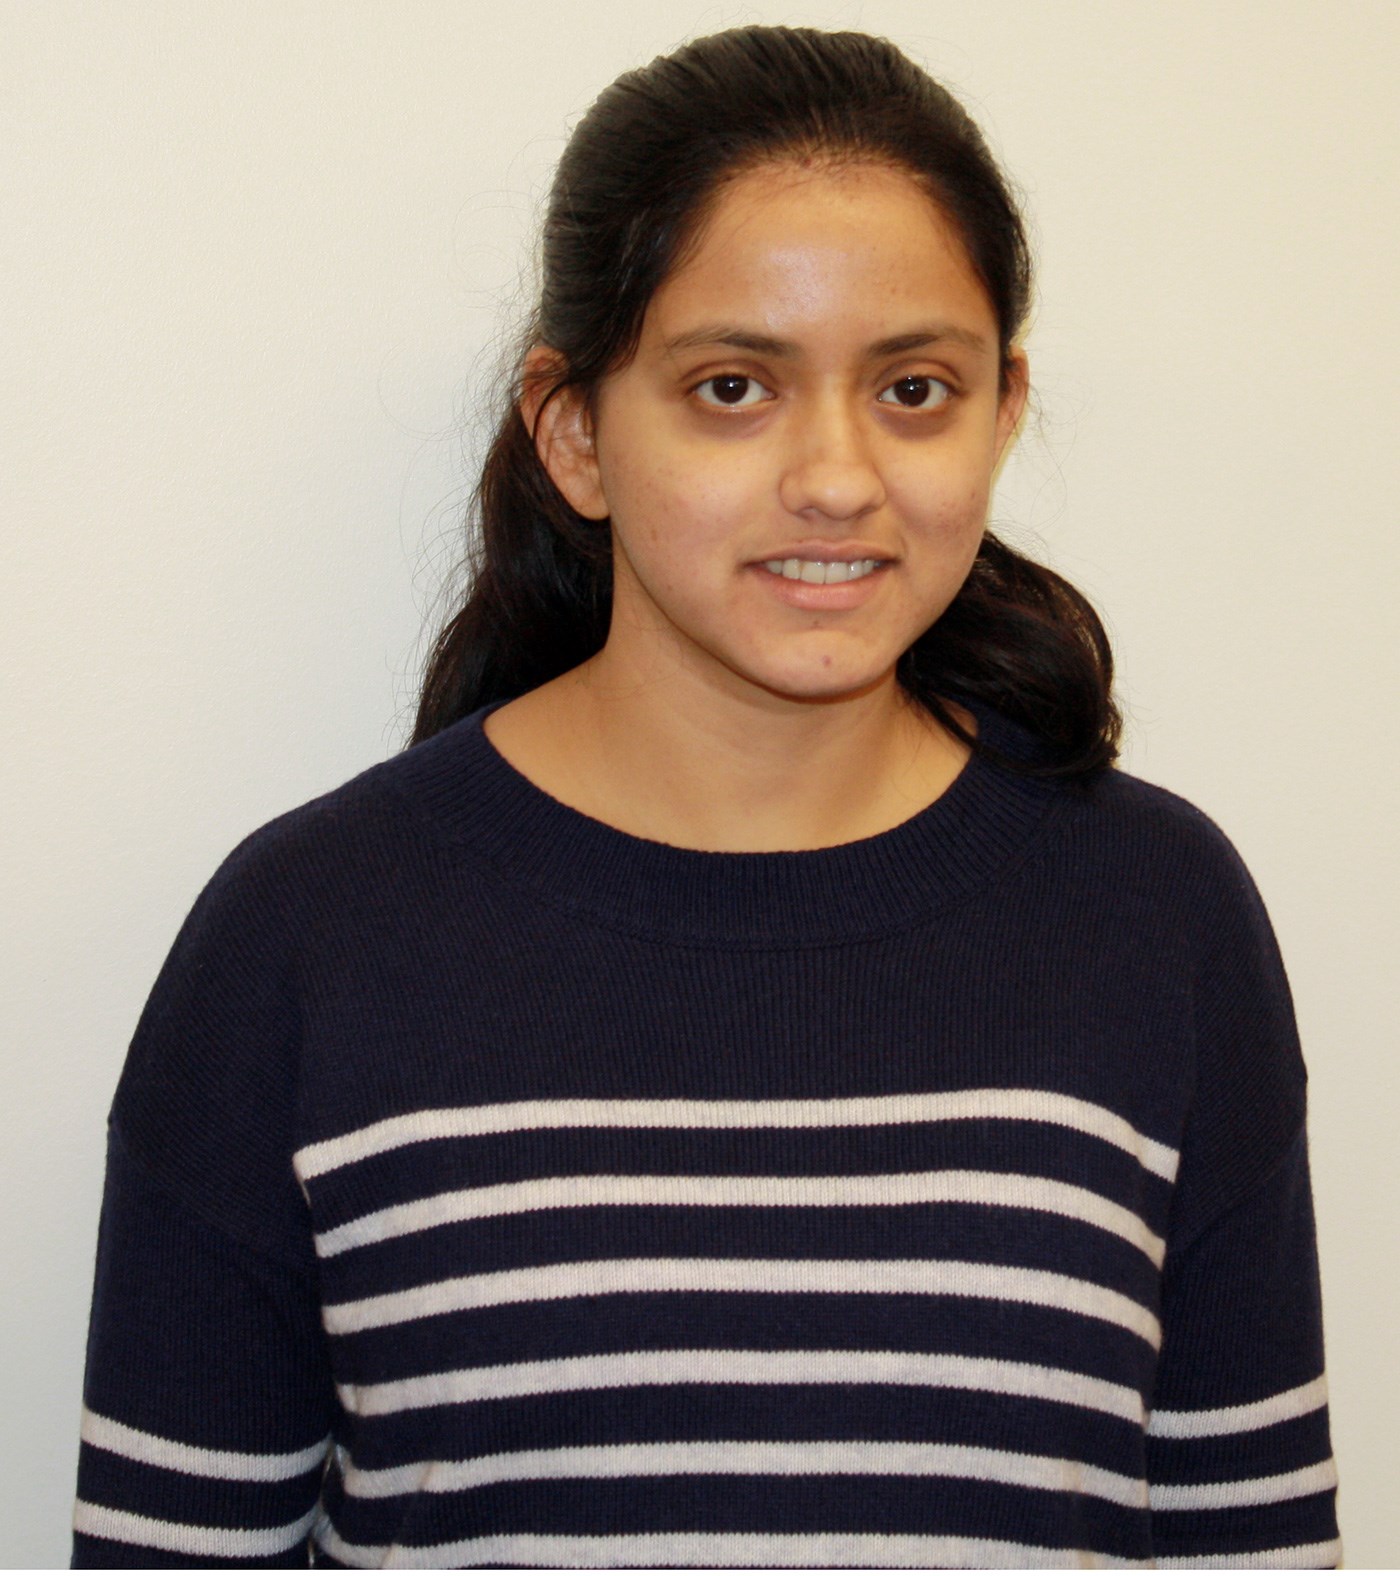 Sanjana Vinayaka is a Doctoral Student in Structural Engineering Department: Engineering / CEE at UMass Lowell